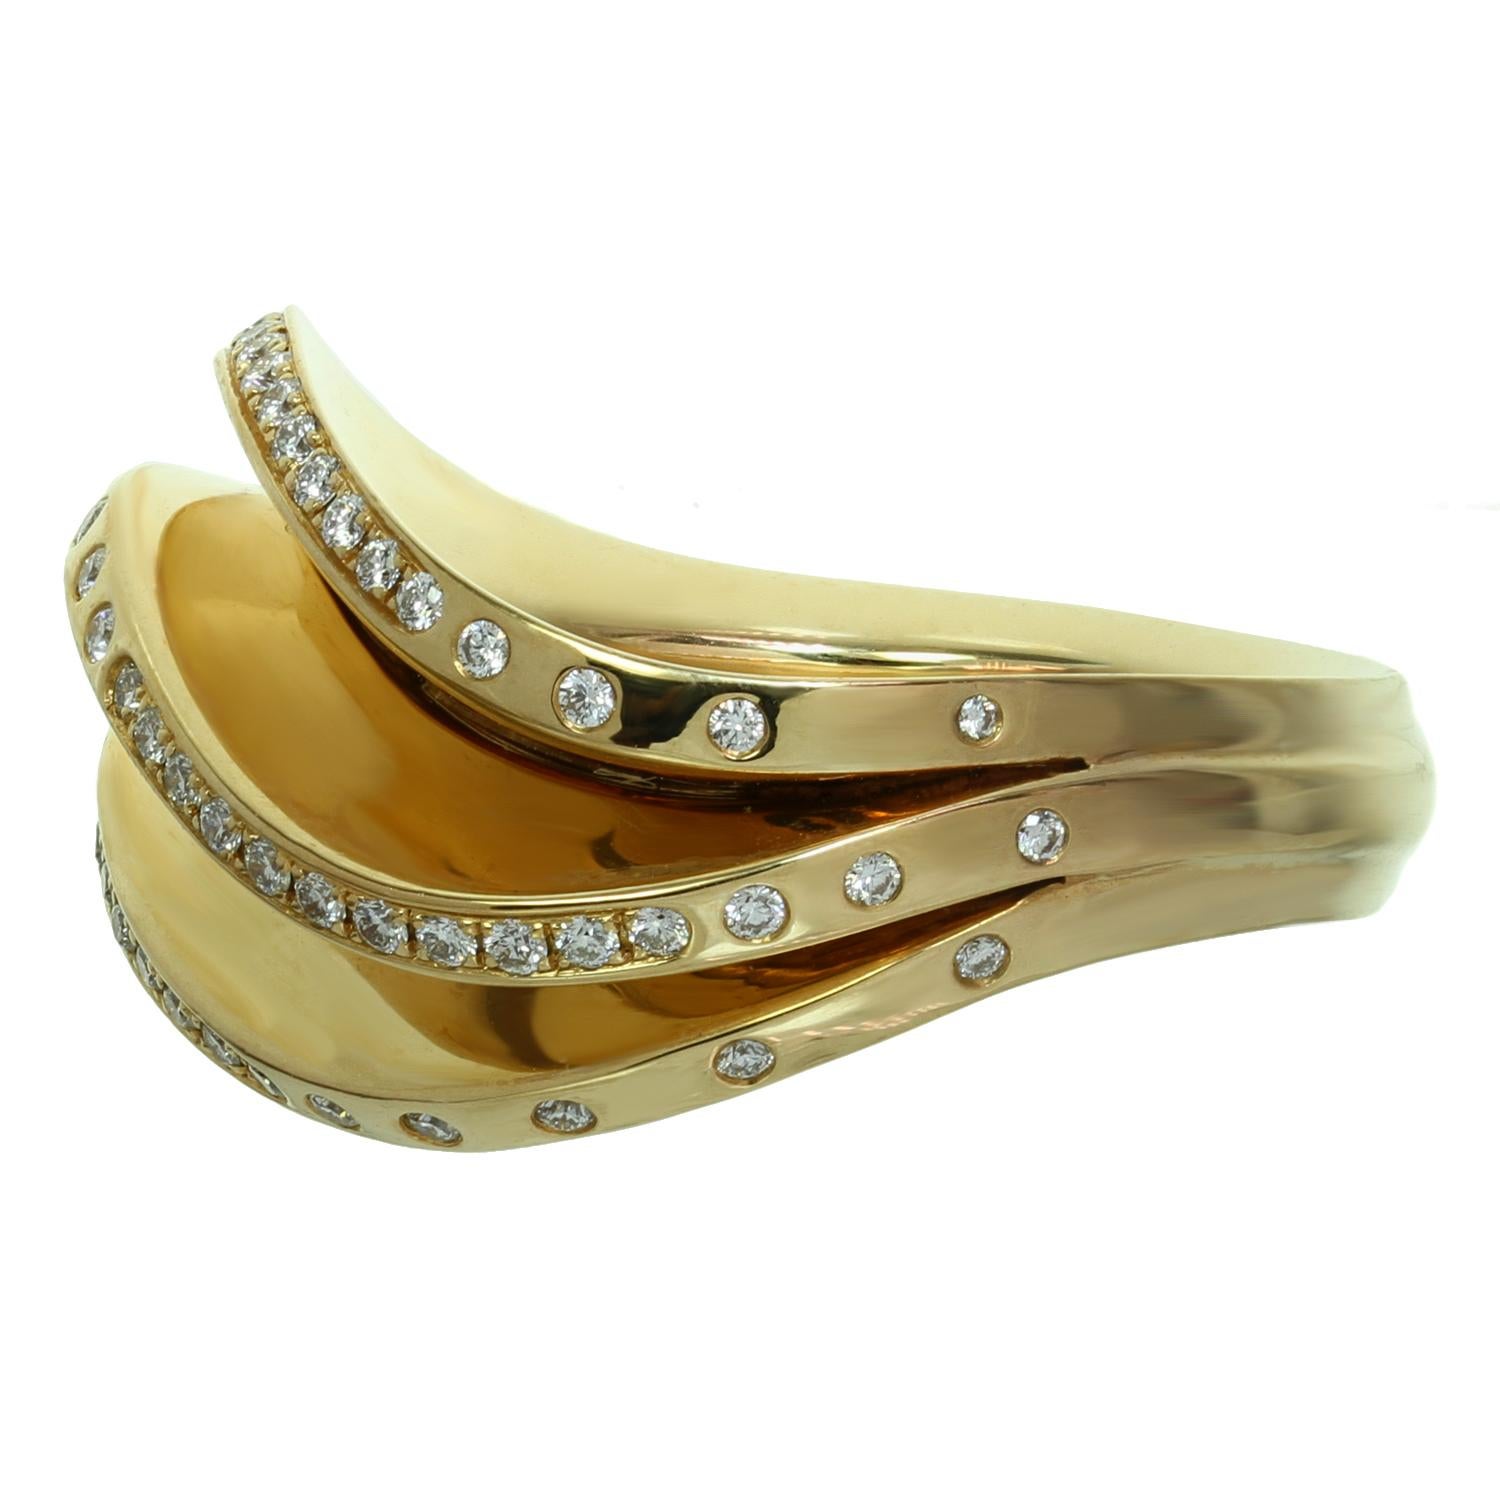 This stunning Cartier Fan ring from the chic Paris Nouvelle Vague collection is crafted in 18k yellow gold and set with D-F VVS1-VVS2 brilliant-cut round diamonds. Made in France circa 2013. Measurements: 0.55